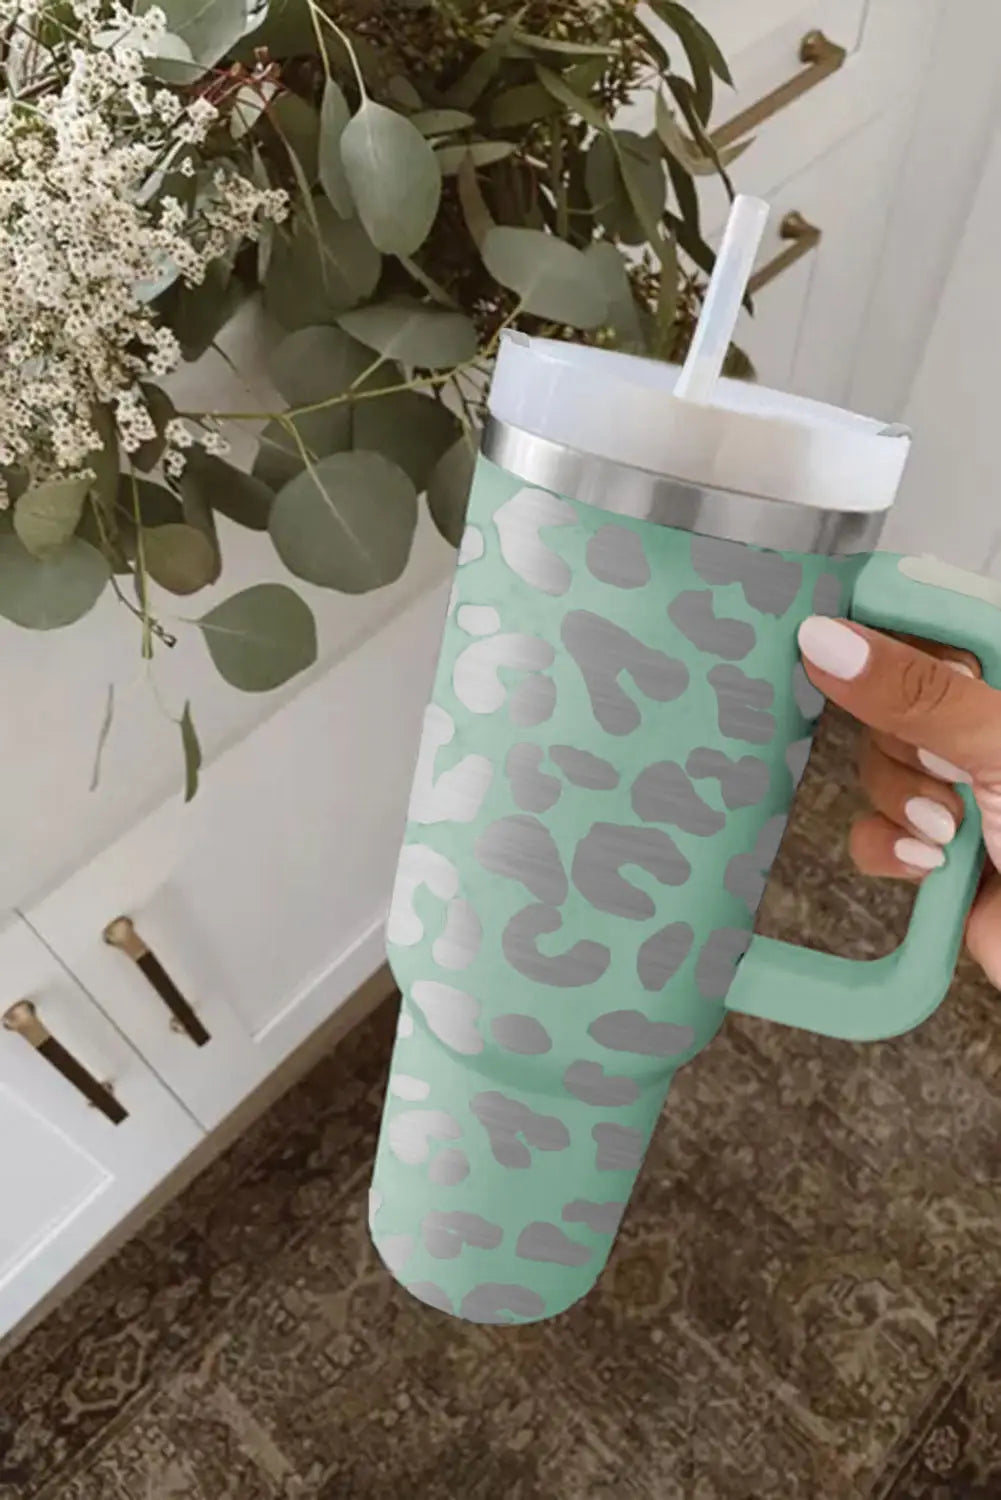 Green leopard print 40oz stainless steel portable cup with handle - one size / steel - tumblers